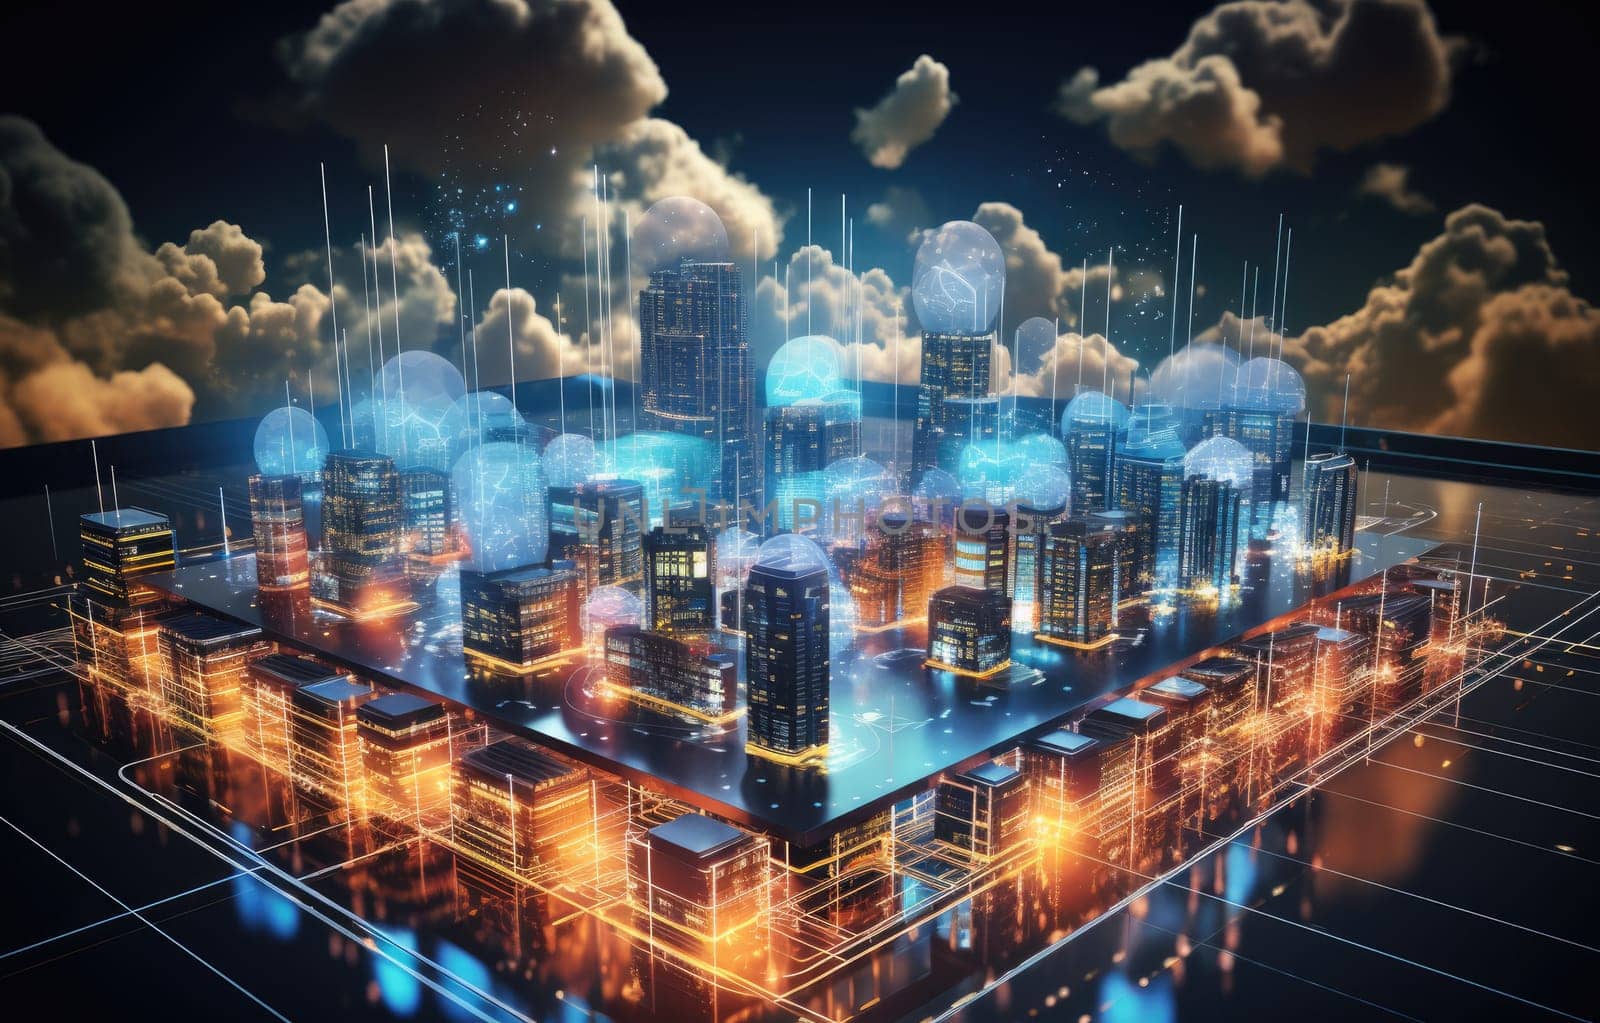 Cloud computing concept. Smart city wireless internet communication with cloud storage, cloud services. Download, upload data on server. Digital cloud over virtual Smart City on podium.